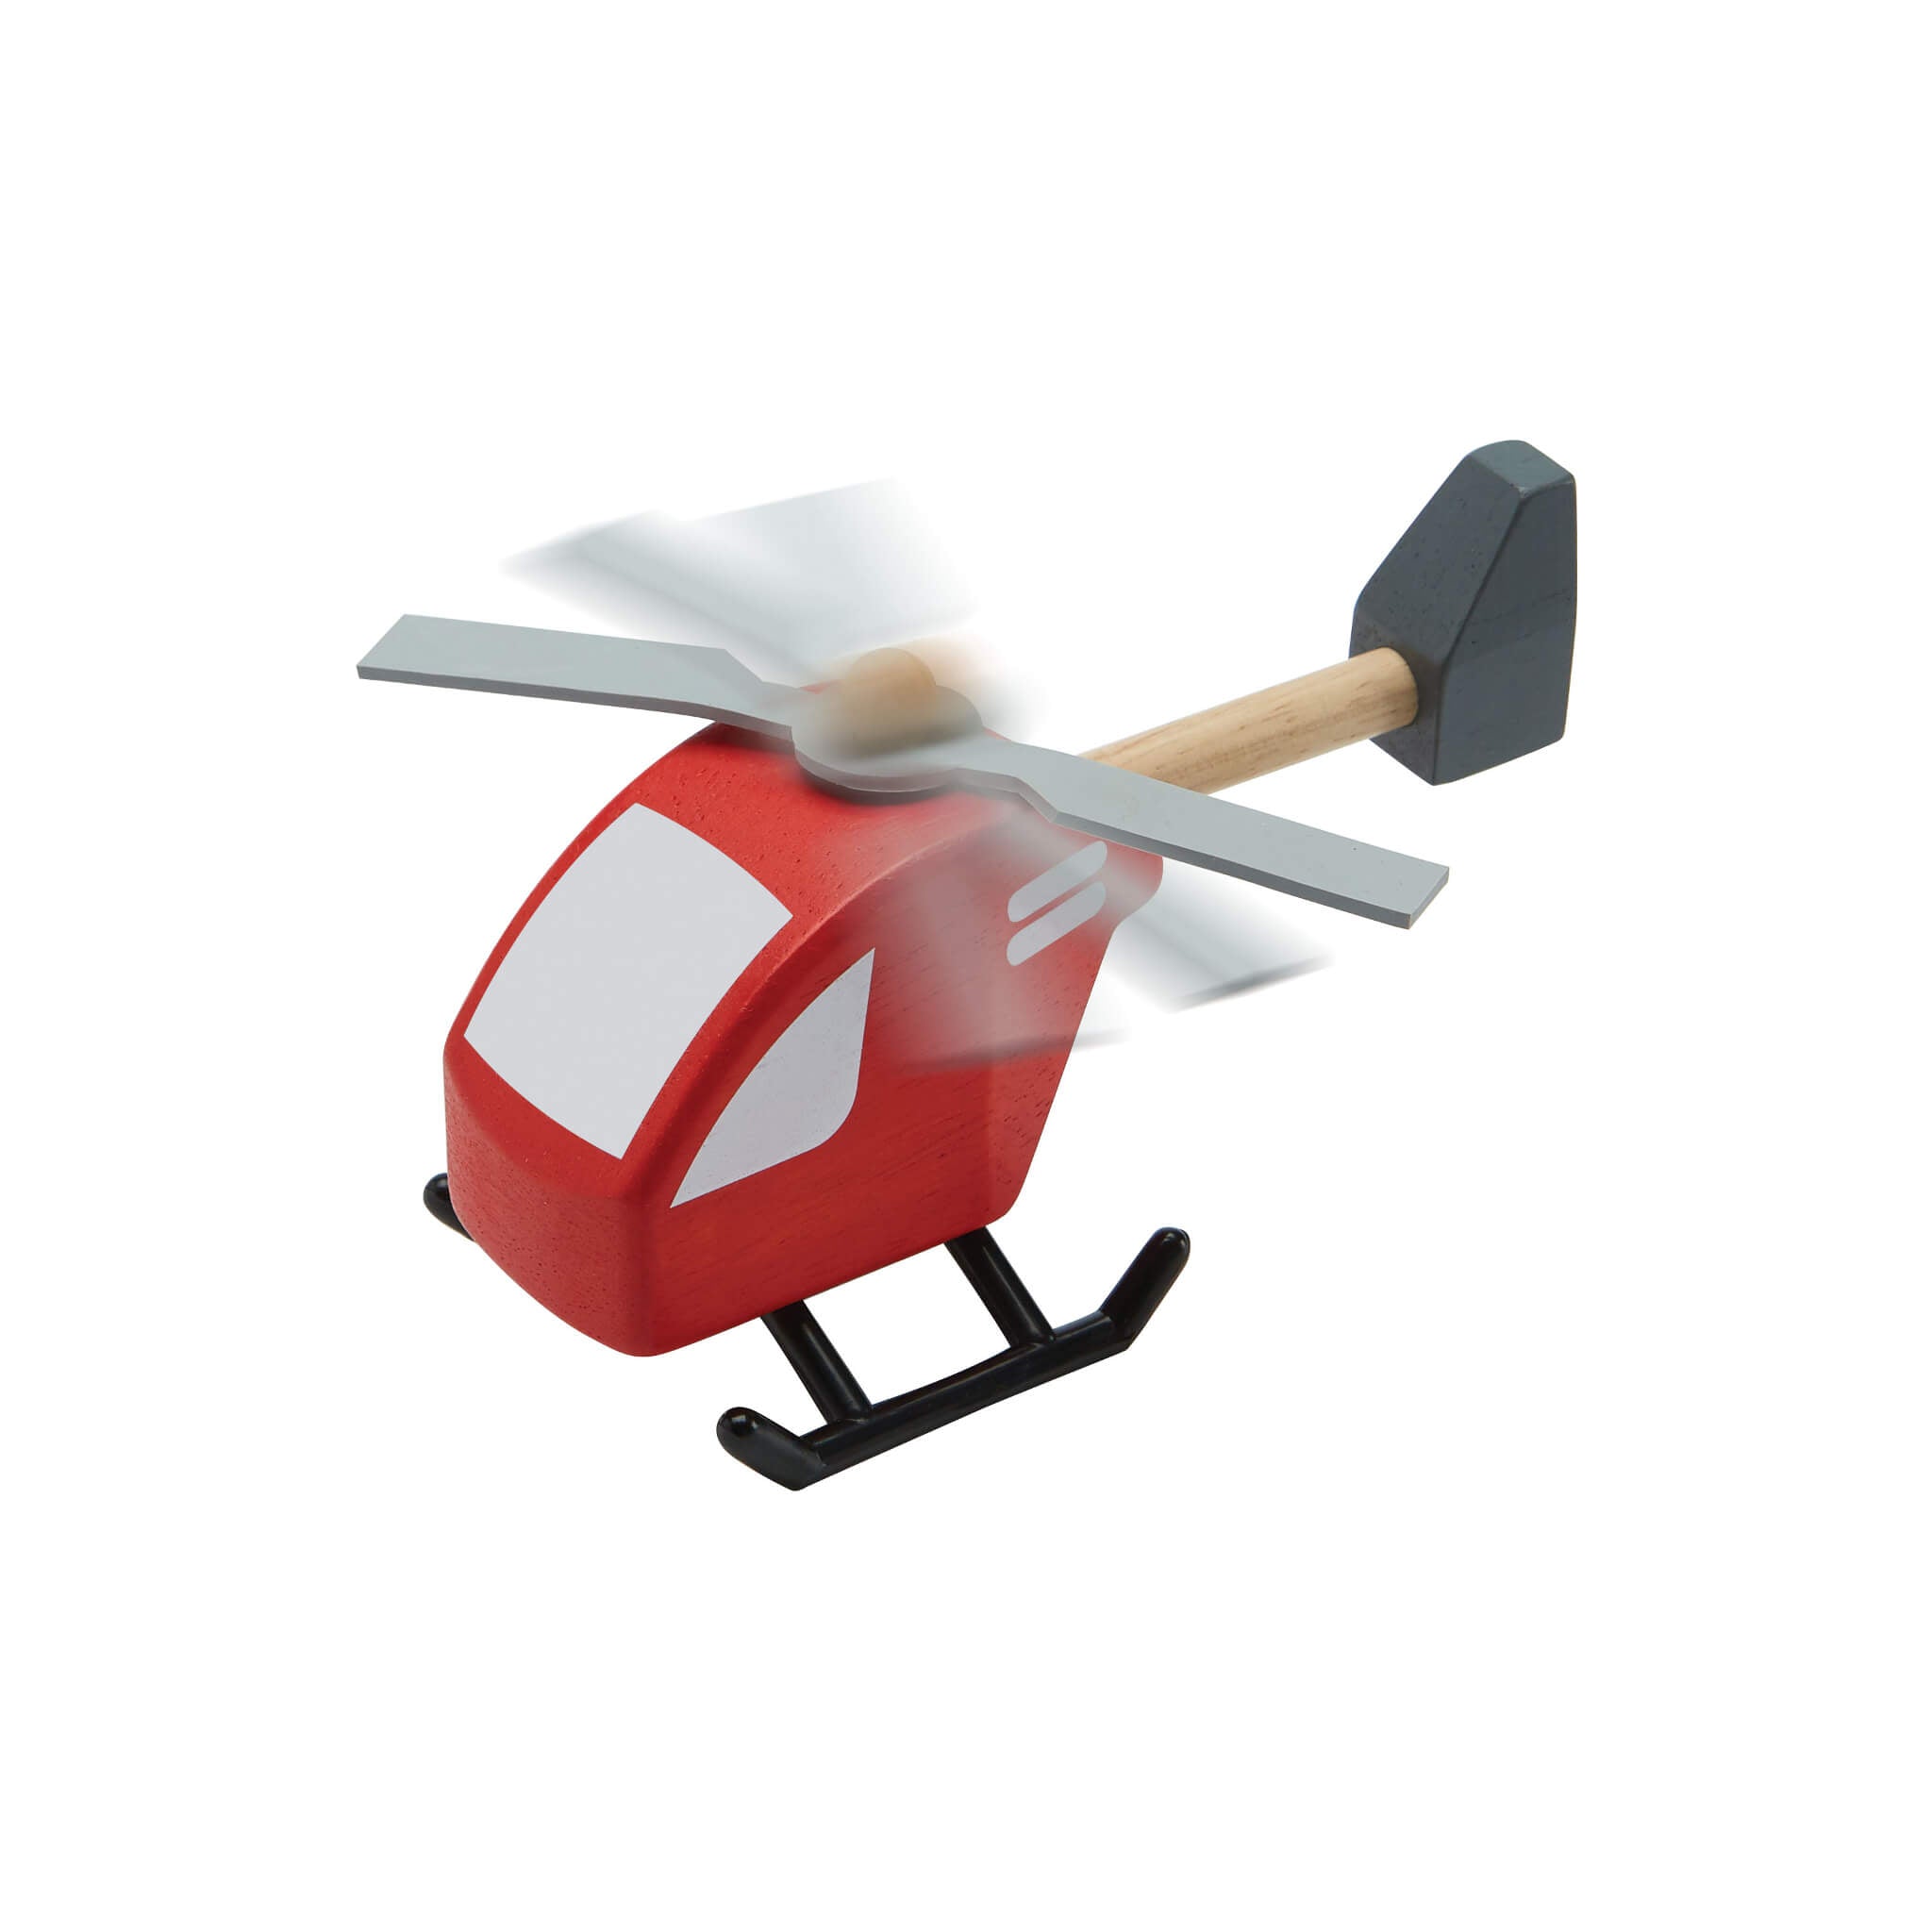 Wooden Helicopter